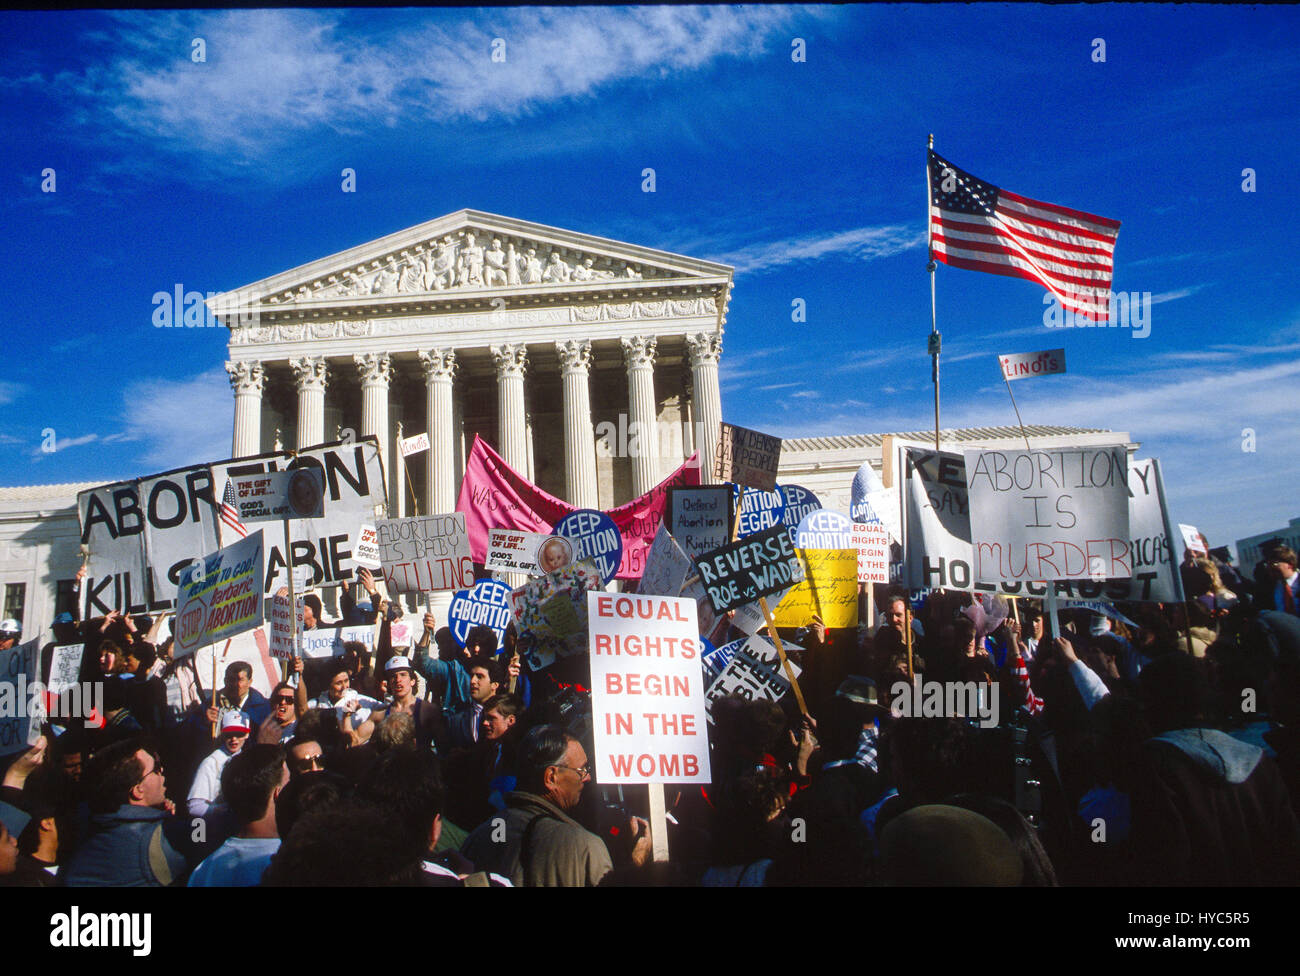 Hundreds of thousands of people participate in the Annual RIght to Life March which starts at the Monument grounds and then travels the lenght of Pennsylvania Avenue to pass in front of the United States Supreme Court,Washington DC., January 22, 1989. Photo by Mark Reinstein Stock Photo